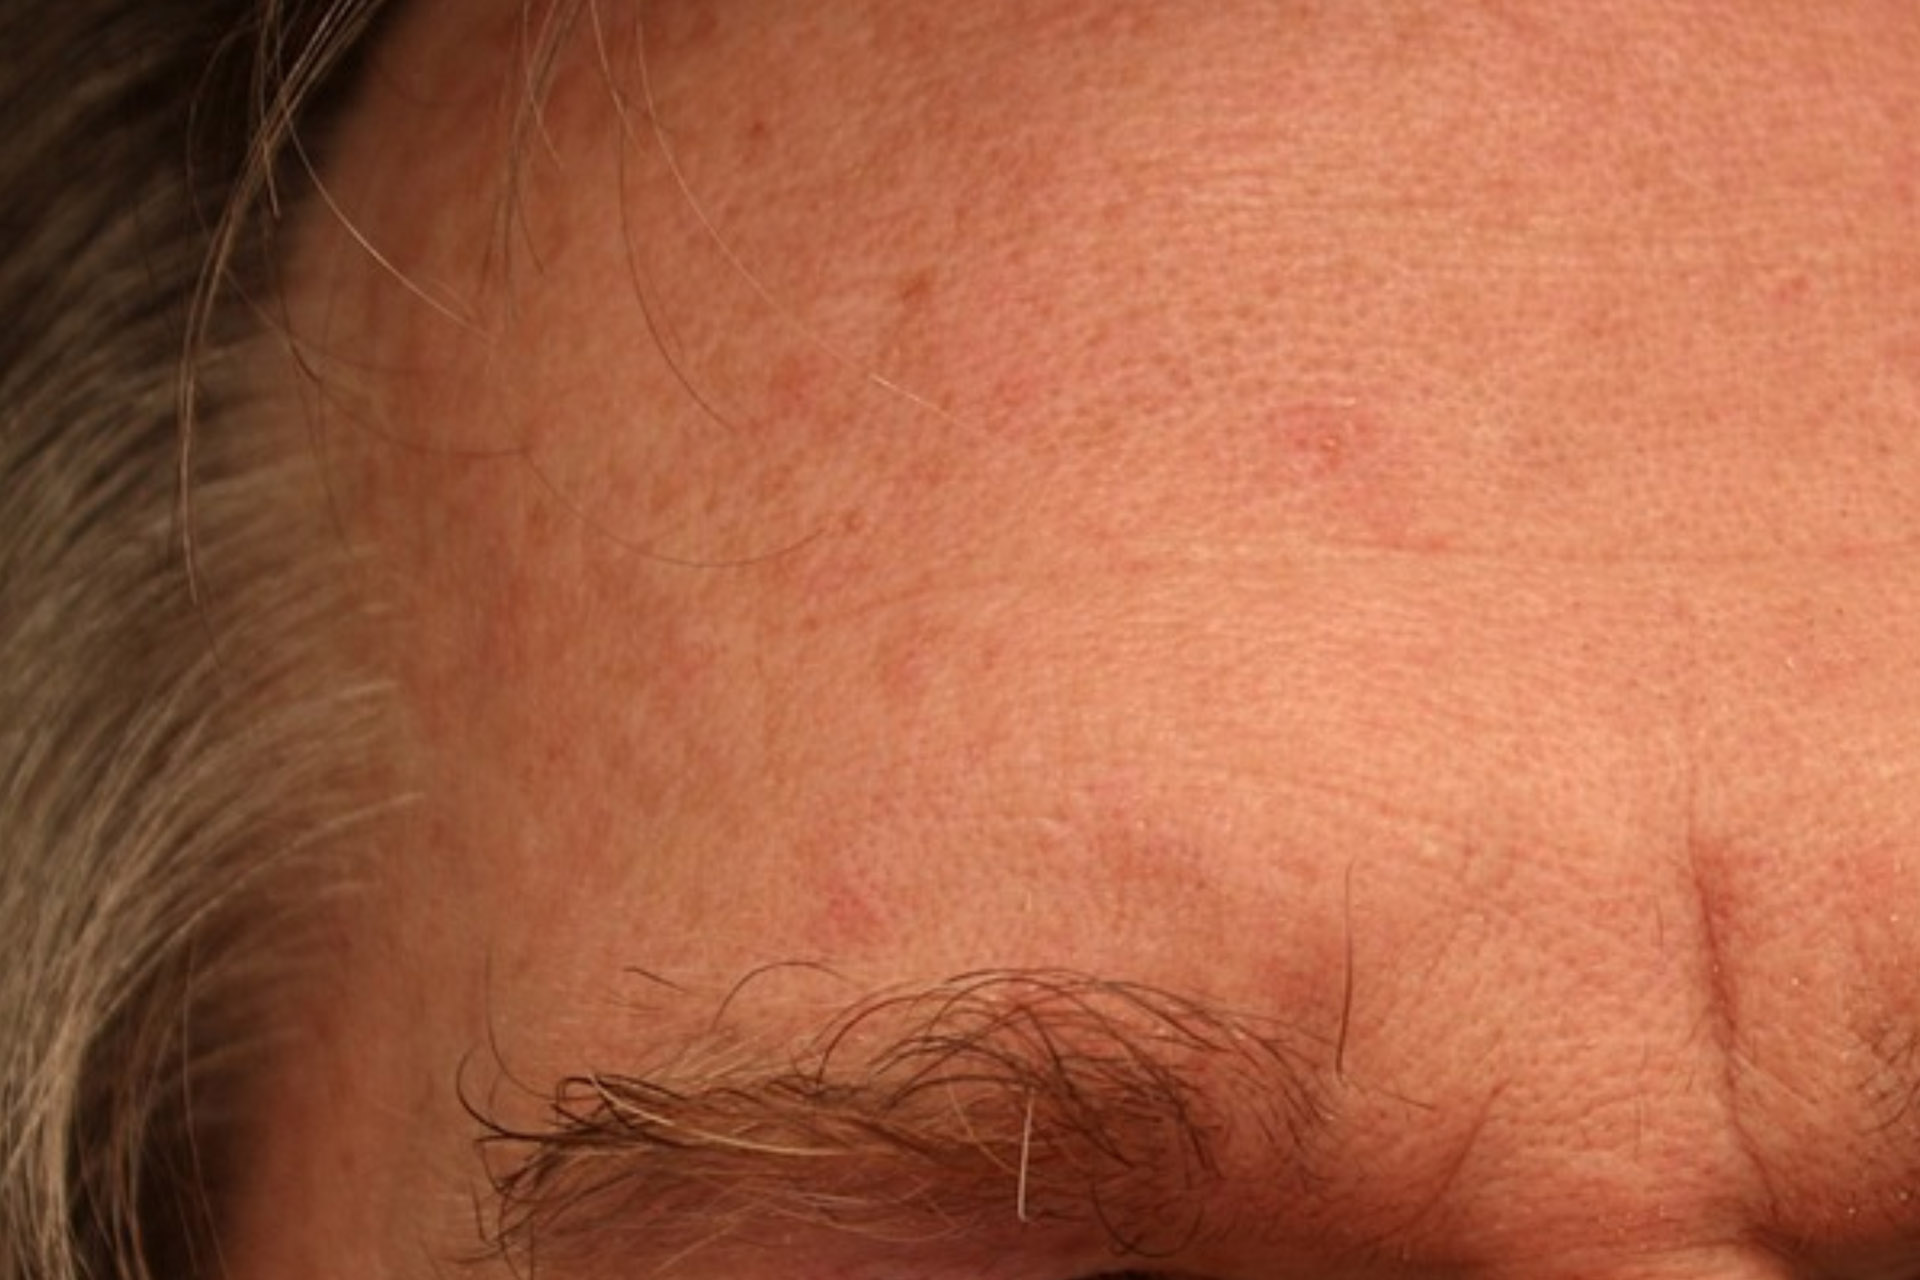 Forehead wrinkles, an example of what Morpheus8 and microneedling can treat